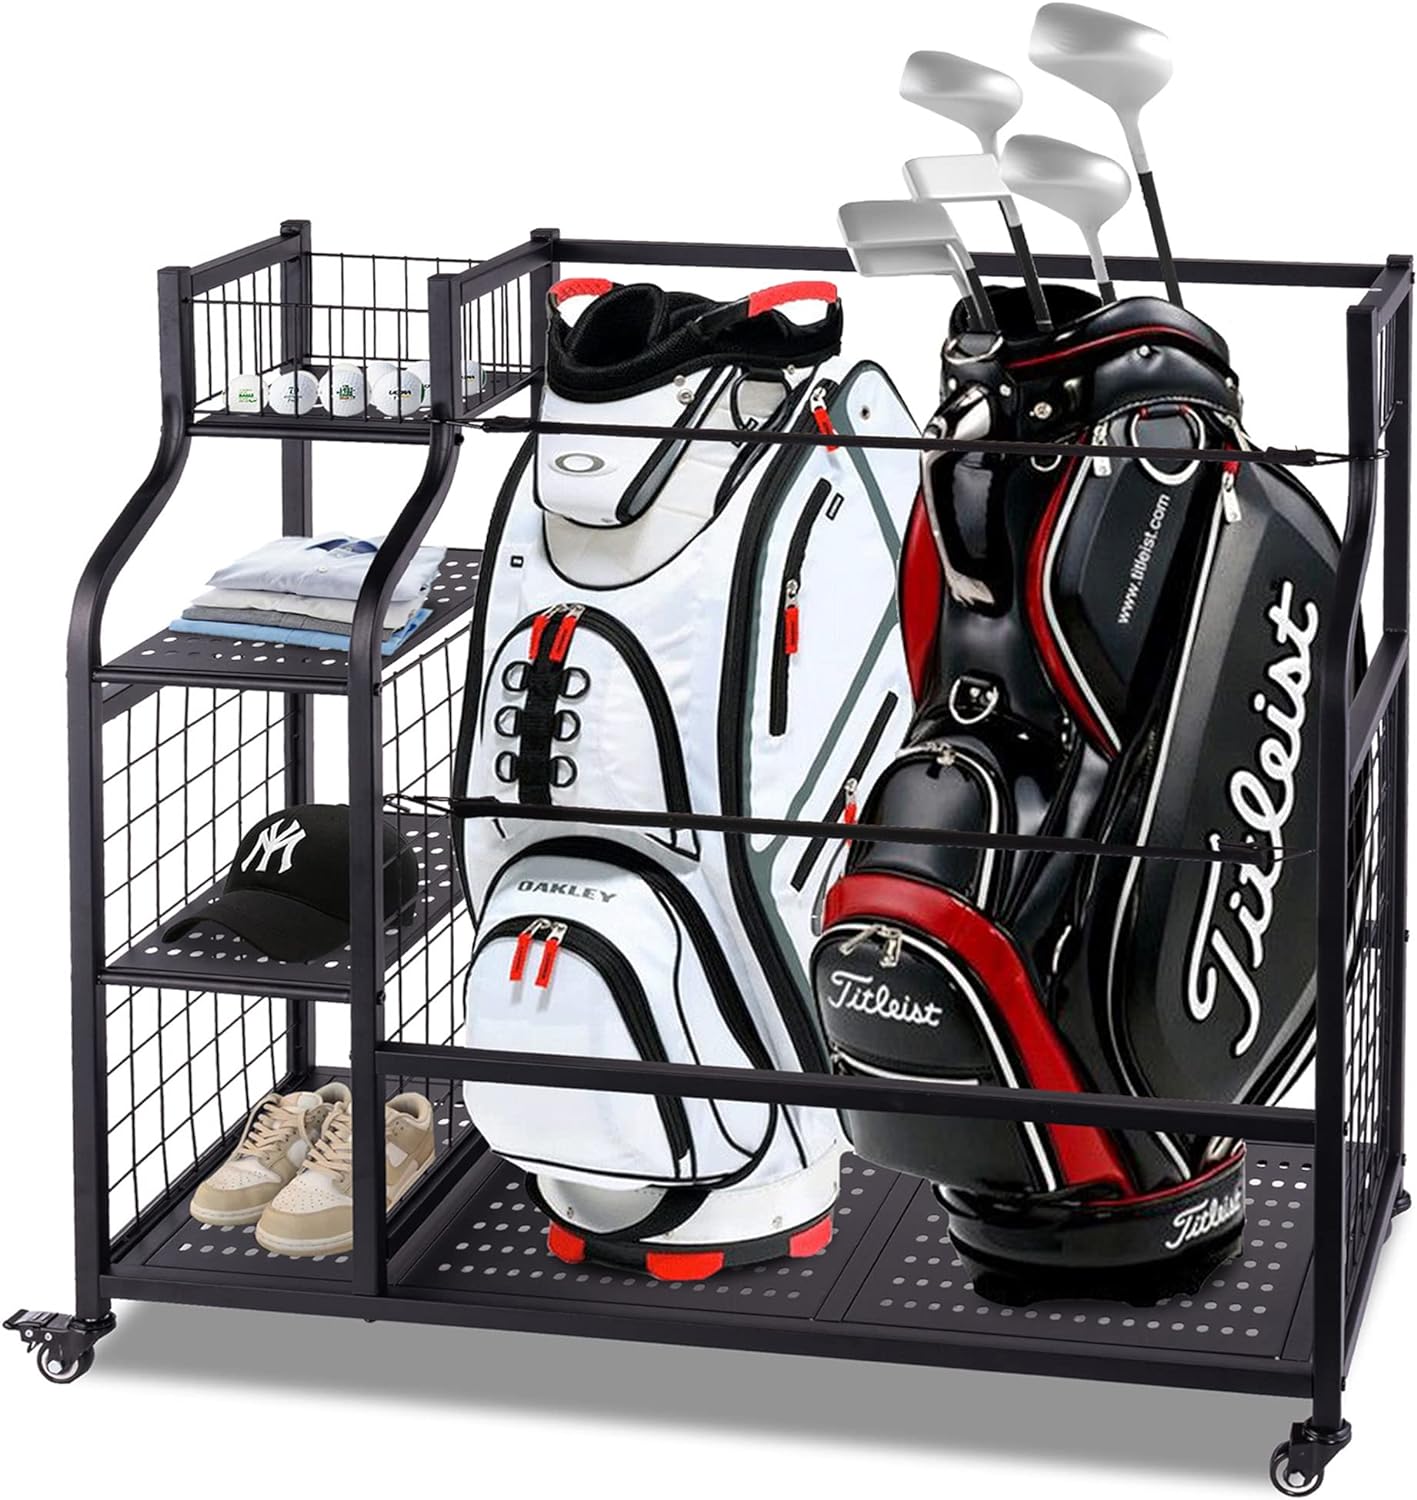 Morvat Golf Organizer Extra Large Double Metal Black Stand Perfect Way to  Store & Organize Your Golfing Bags, Clubs, Balls, Gadgets, Accessories 